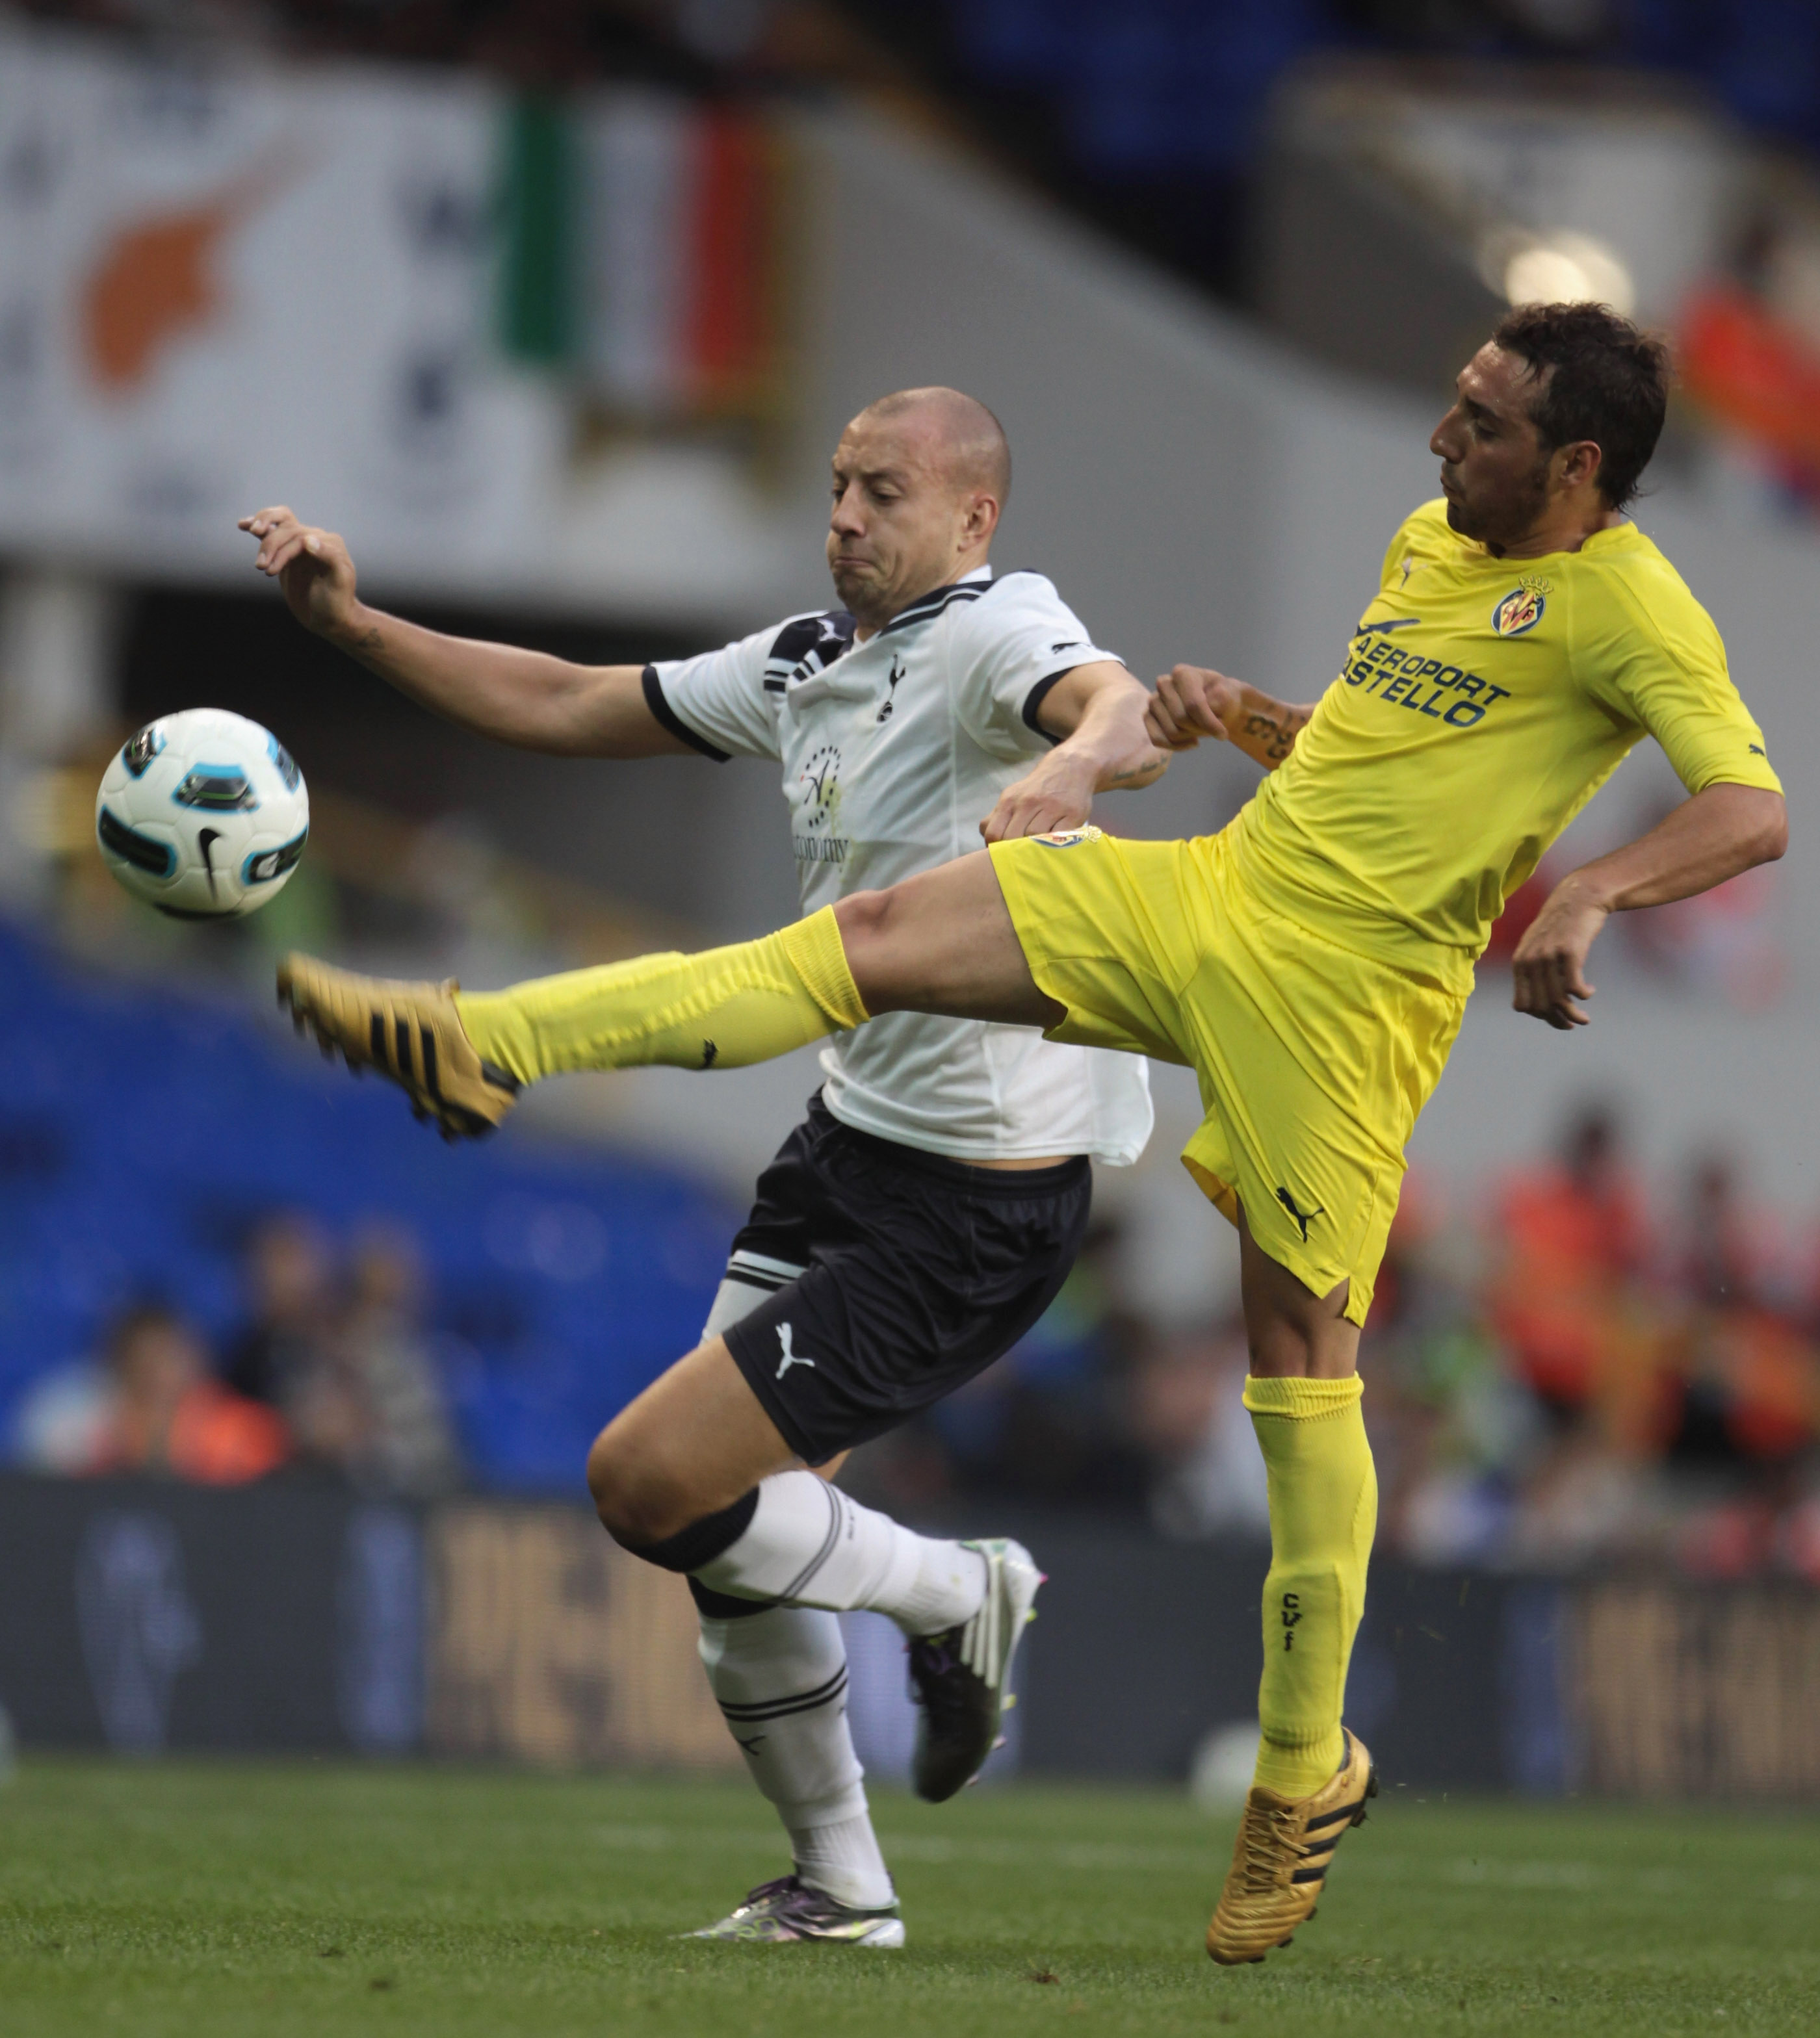 LONDON, ENGLAND - JULY 29: Santi Cazorla of Villarreal (R) tackles Alan Hutton of Tottenham Hotspur during a Pre-Season Friendly between Tottenham Hotspur and  Villarreal at White Hart Lane on July 29, 2010 in London, England.  (Photo by Phil Cole/Getty I